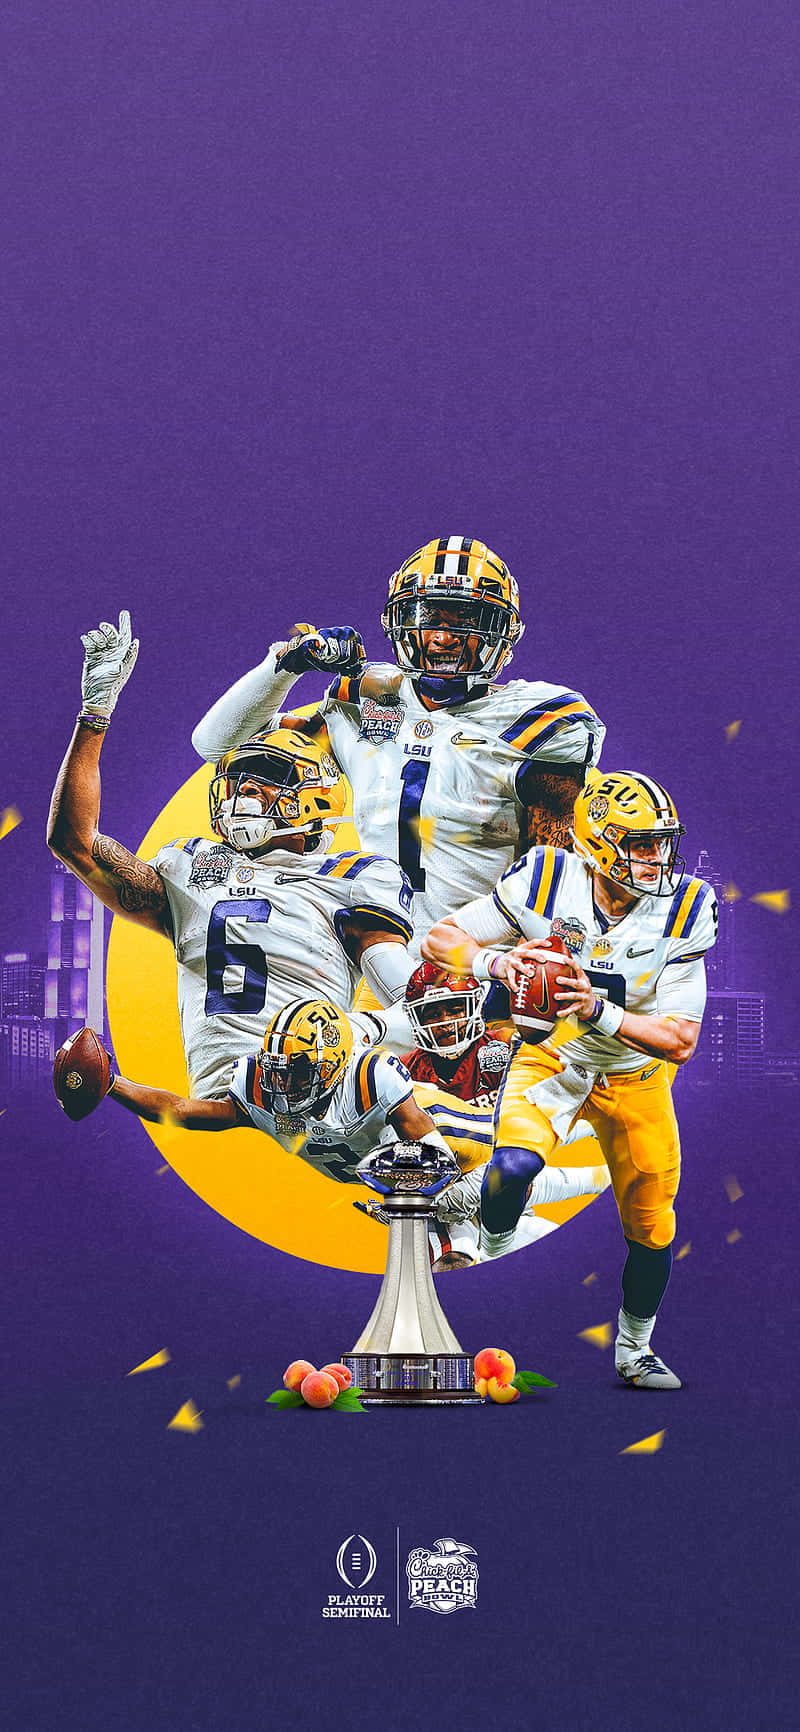 Lsu Football Players In Purple And Yellow Wallpaper